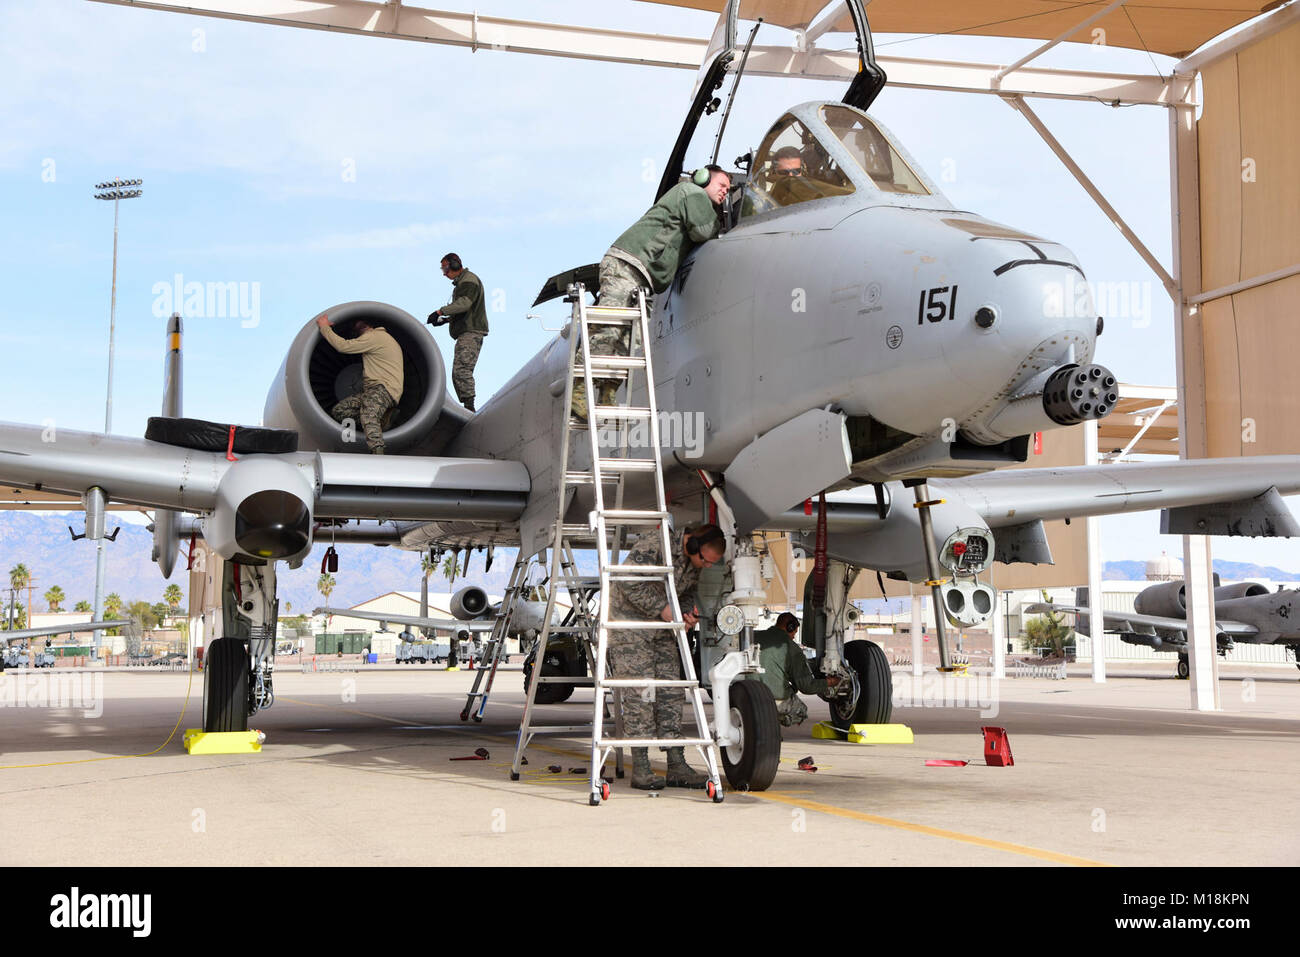 The A-10C Thunderbolt II Demonstration Team conducts a post-flight inspection at Davis-Monthan Air Force Base, Ariz., Jan. 22, 2018. The A-10 Demo Team and A-10 Heritage Flight pilots are scheduled to support a Heritage Flight flyover during the opening ceremonies of Super Bowl LII in Minneapolis, Minnesota. (U.S. Air Force Stock Photo